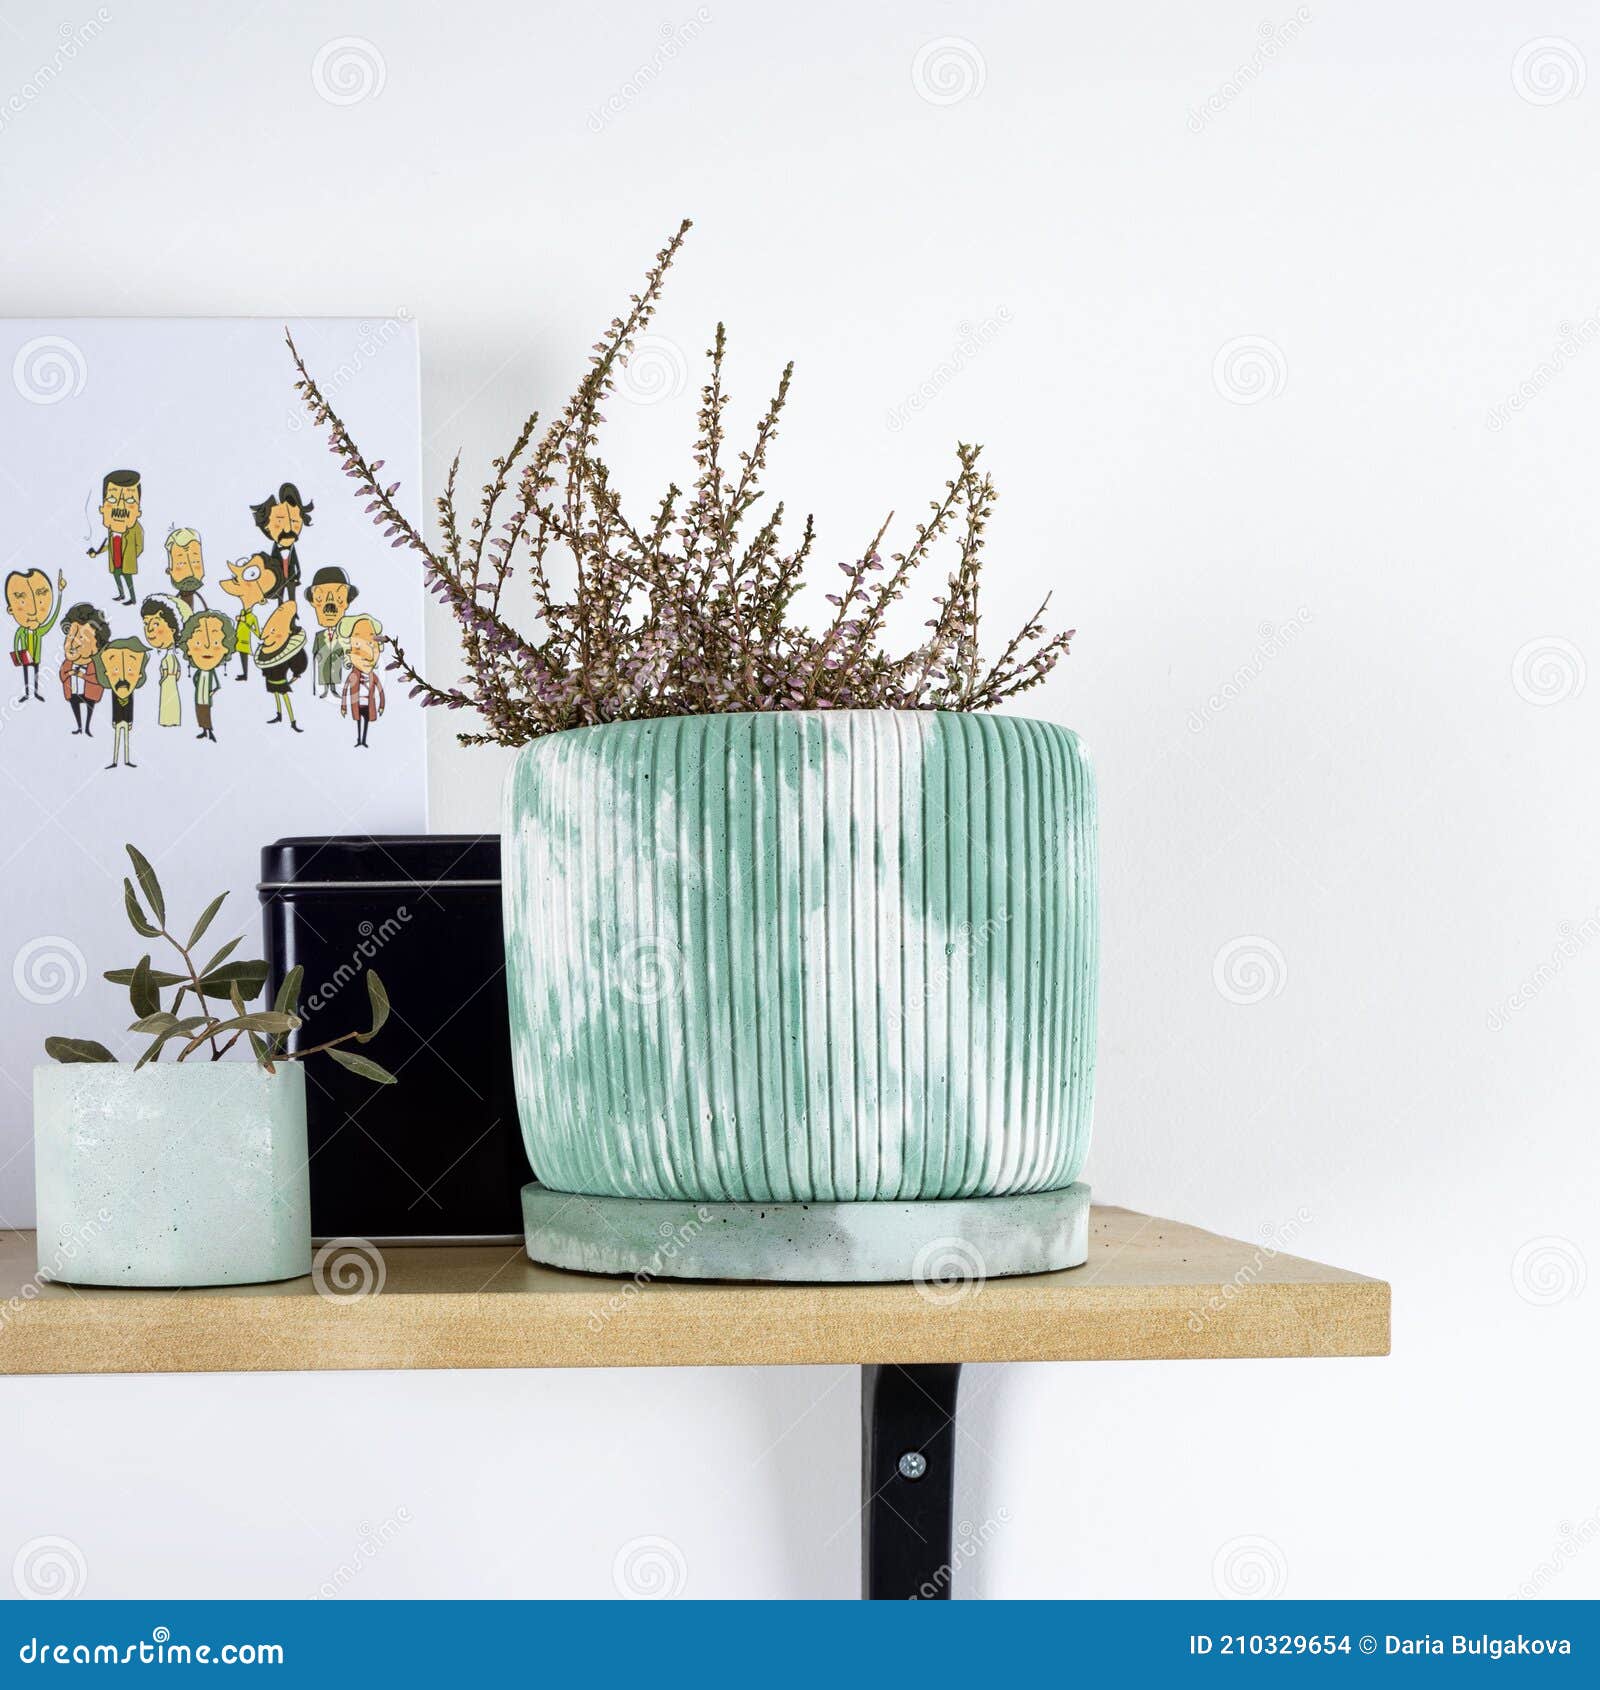 creative narural homemade flowerpot in green concrete with dried flowers on a shelf in a cozy home. wabi sabi, eco green